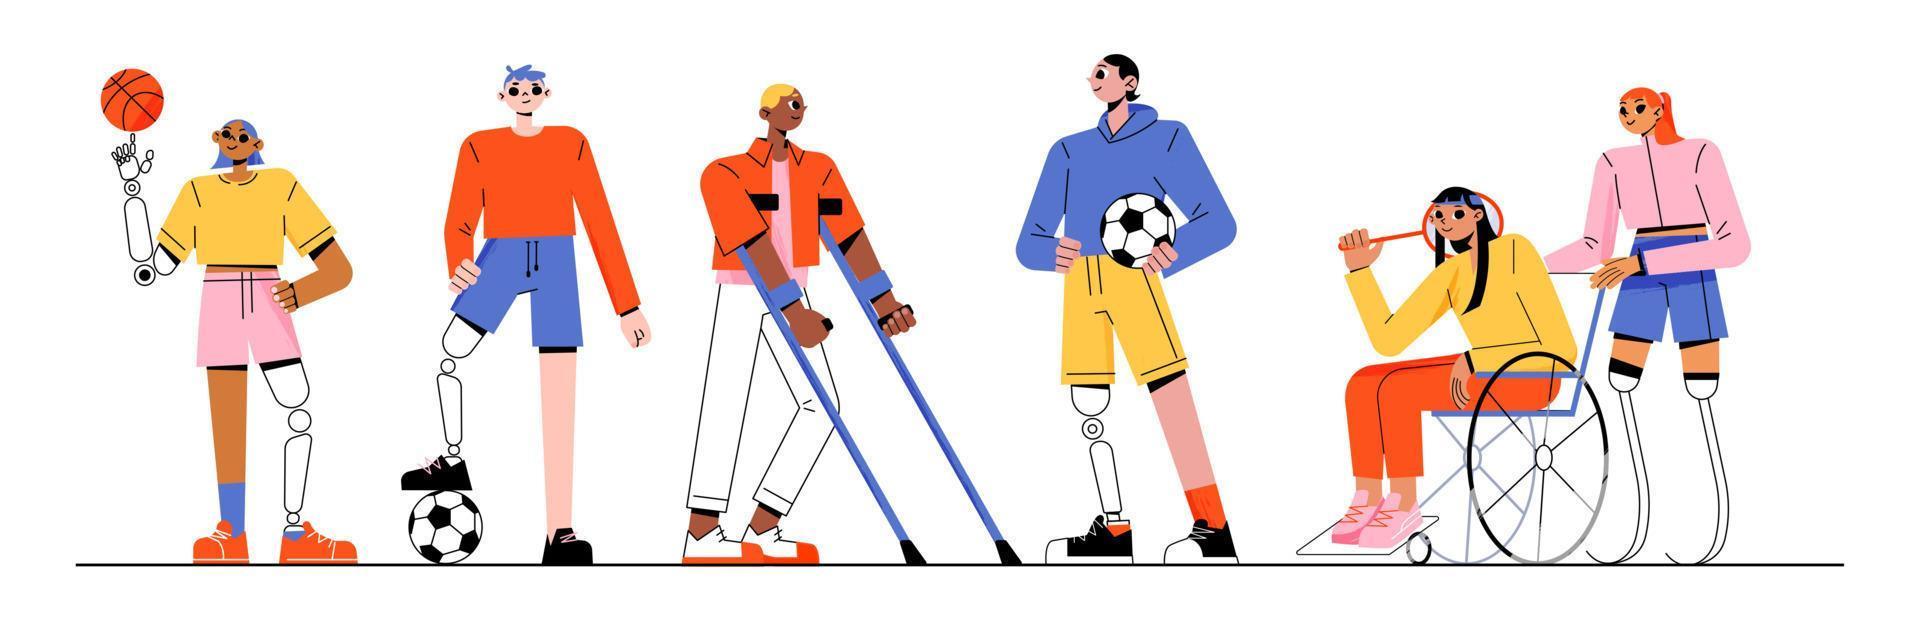 Sport people, paralympic athletes with disability vector